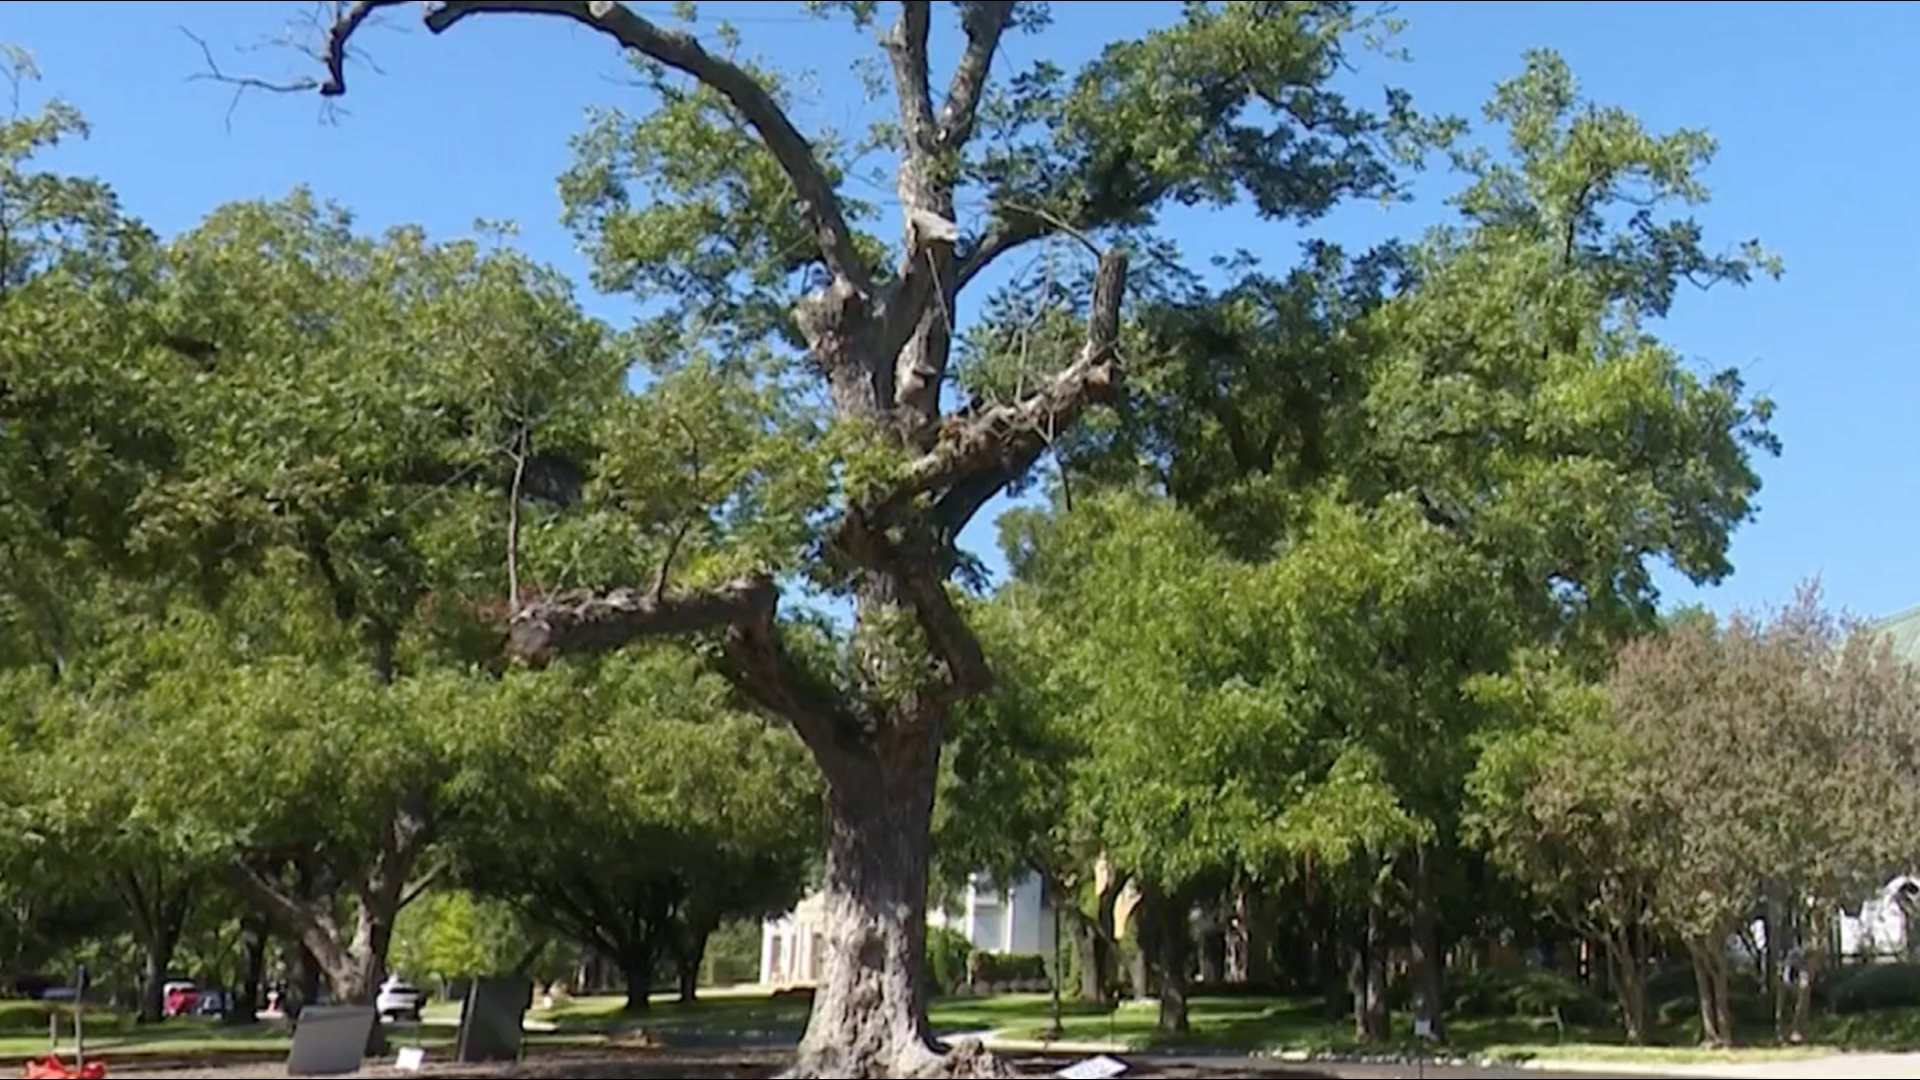 For one of the oldest celebrated trees in North Texas, neighbors are about to say goodbye to something that has meant so much to so many.